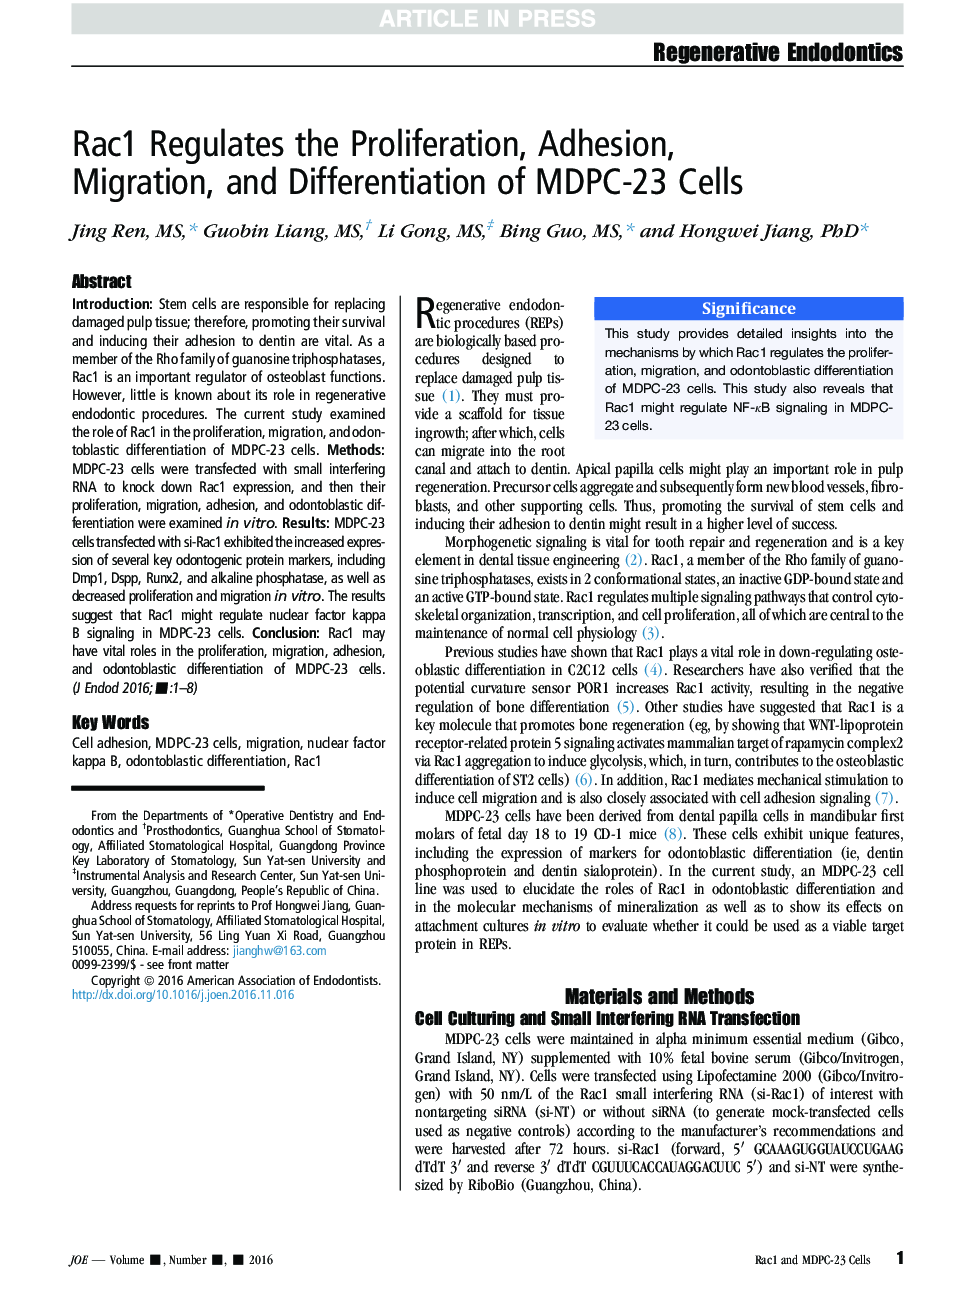 Rac1 Regulates the Proliferation, Adhesion, Migration, and Differentiation of MDPC-23 Cells